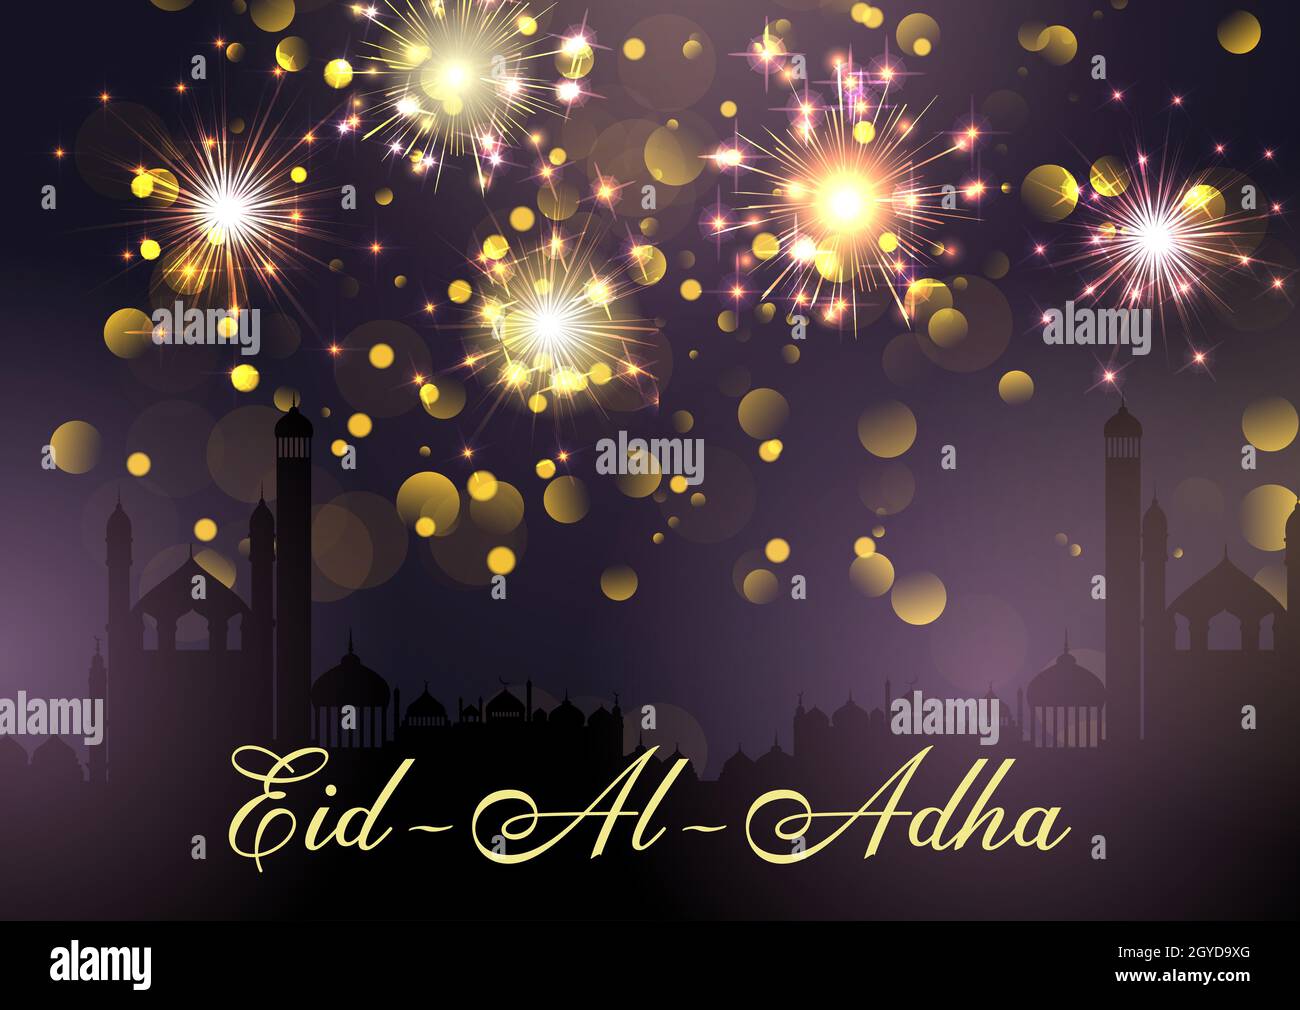 Eid Al Adha background with mosques and fireworks design Stock Photo